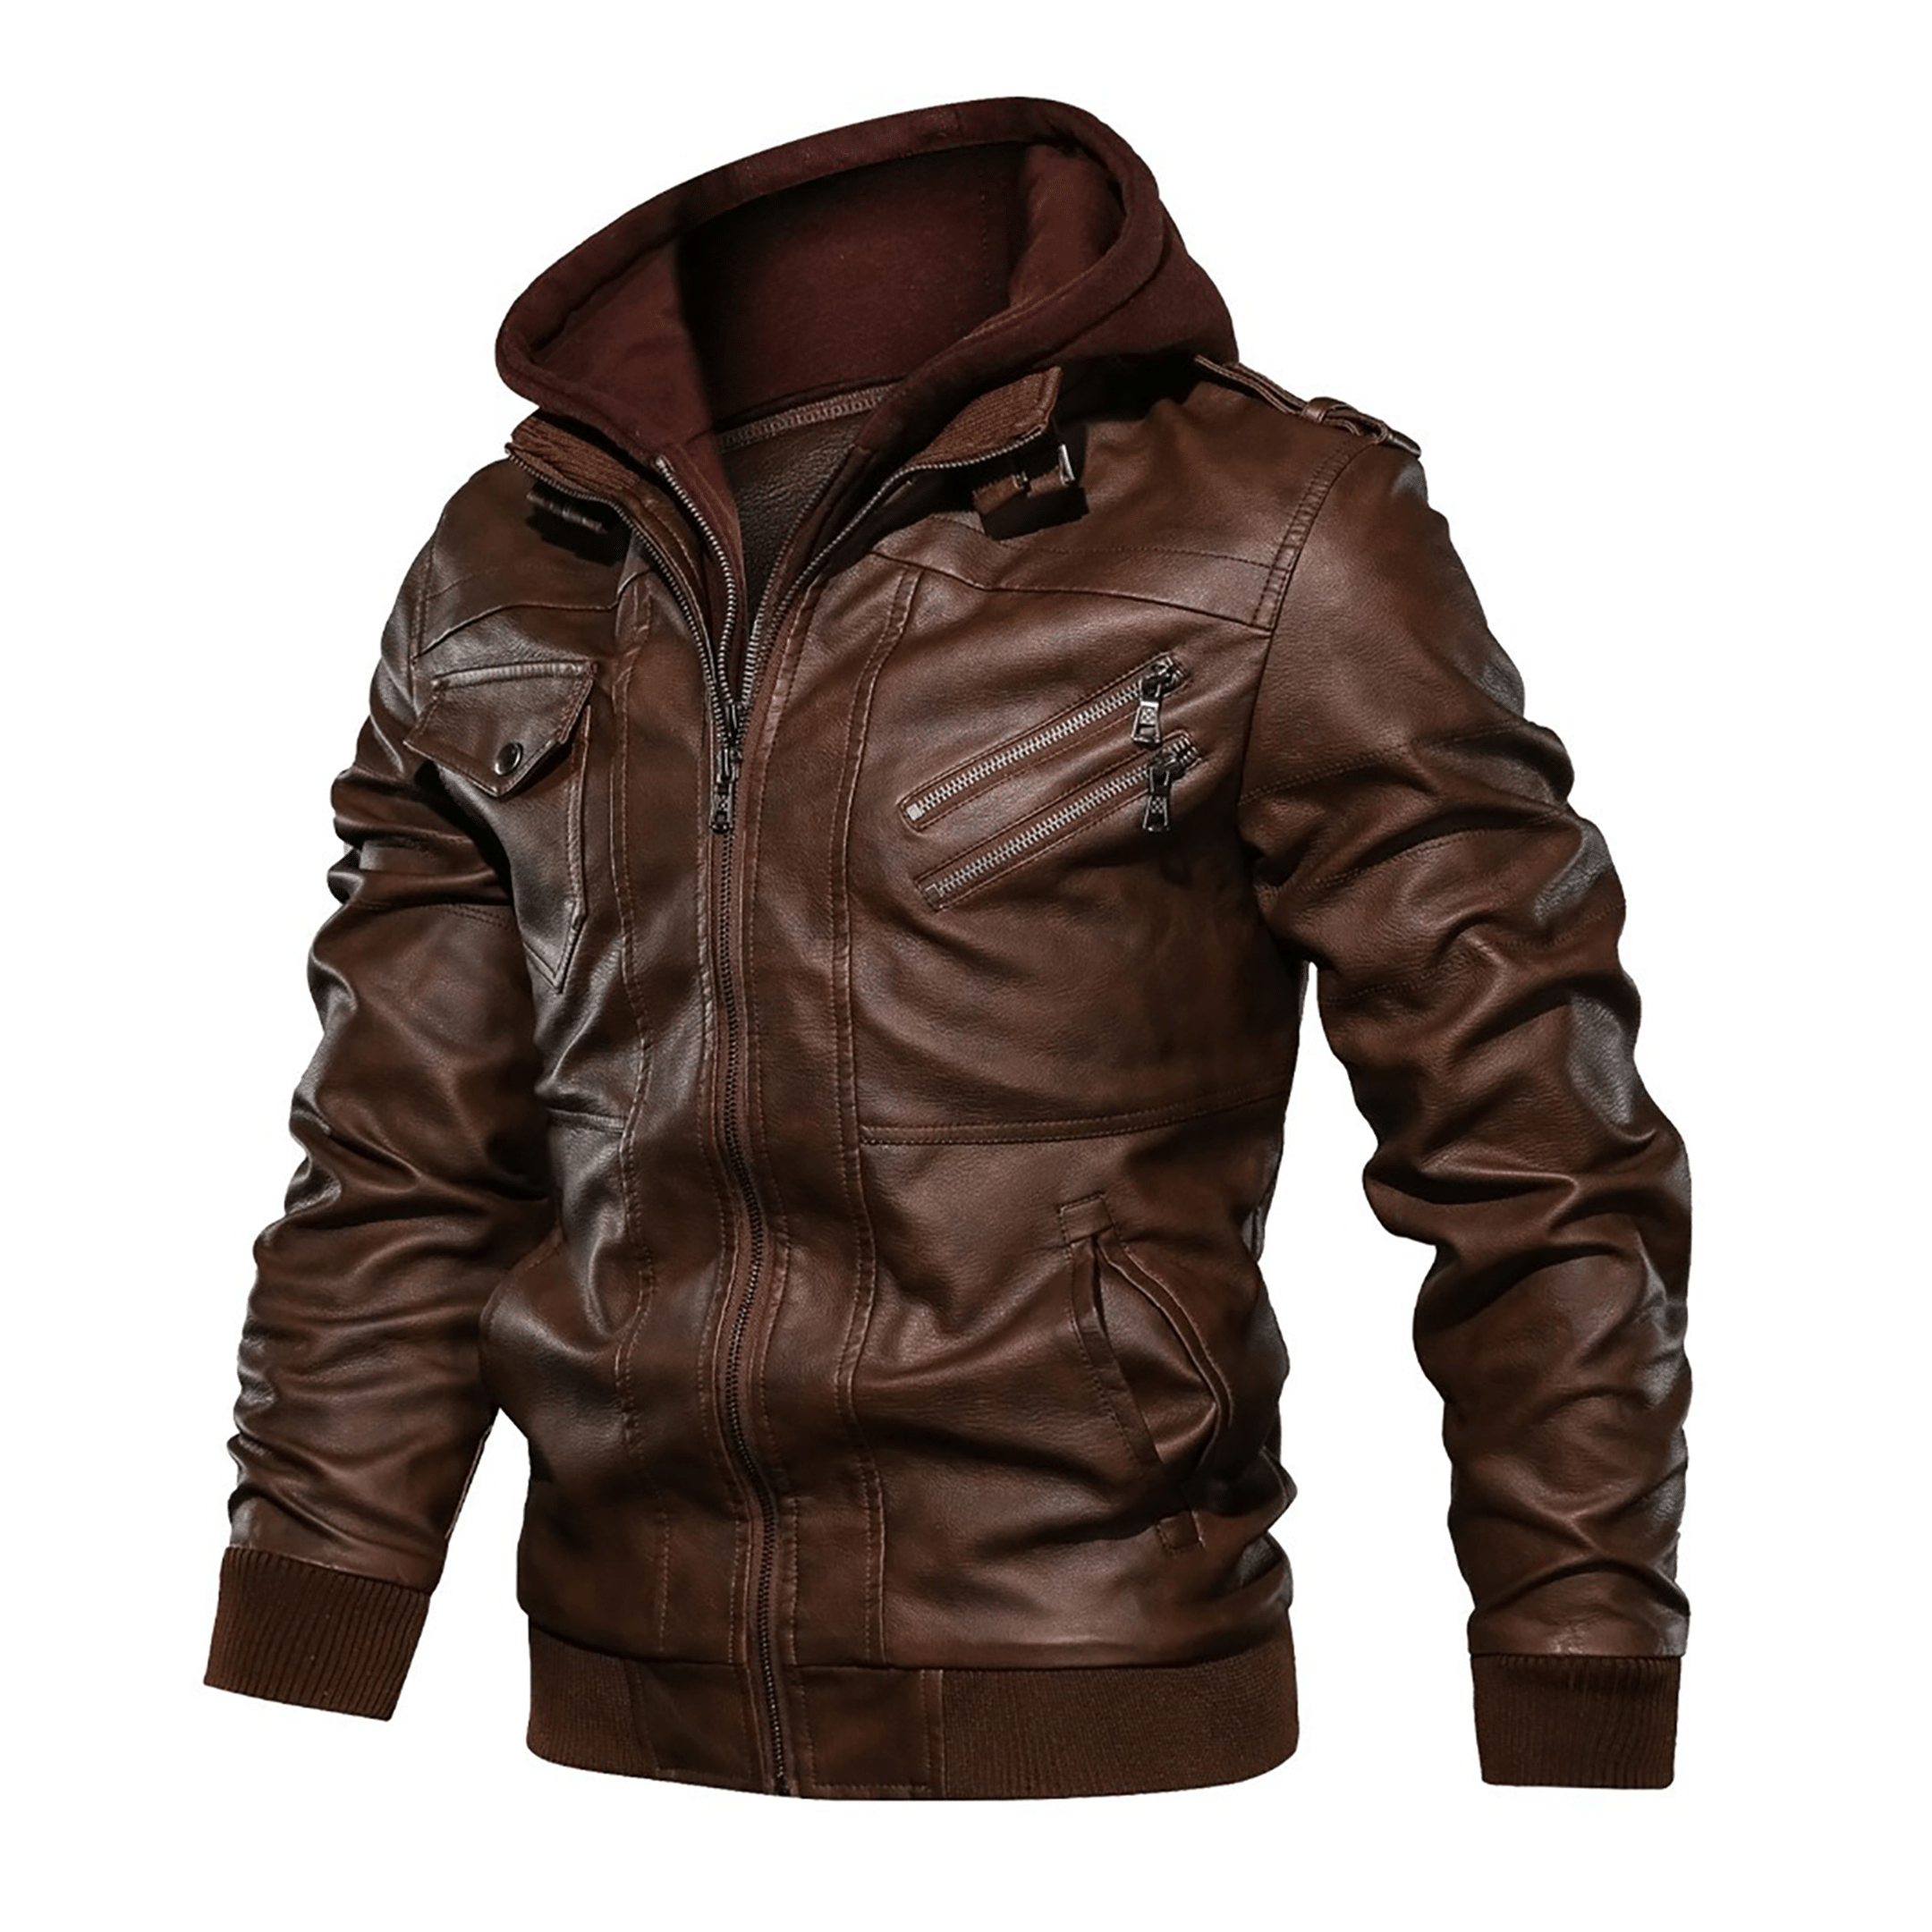 Top leather jackets and latest products 421